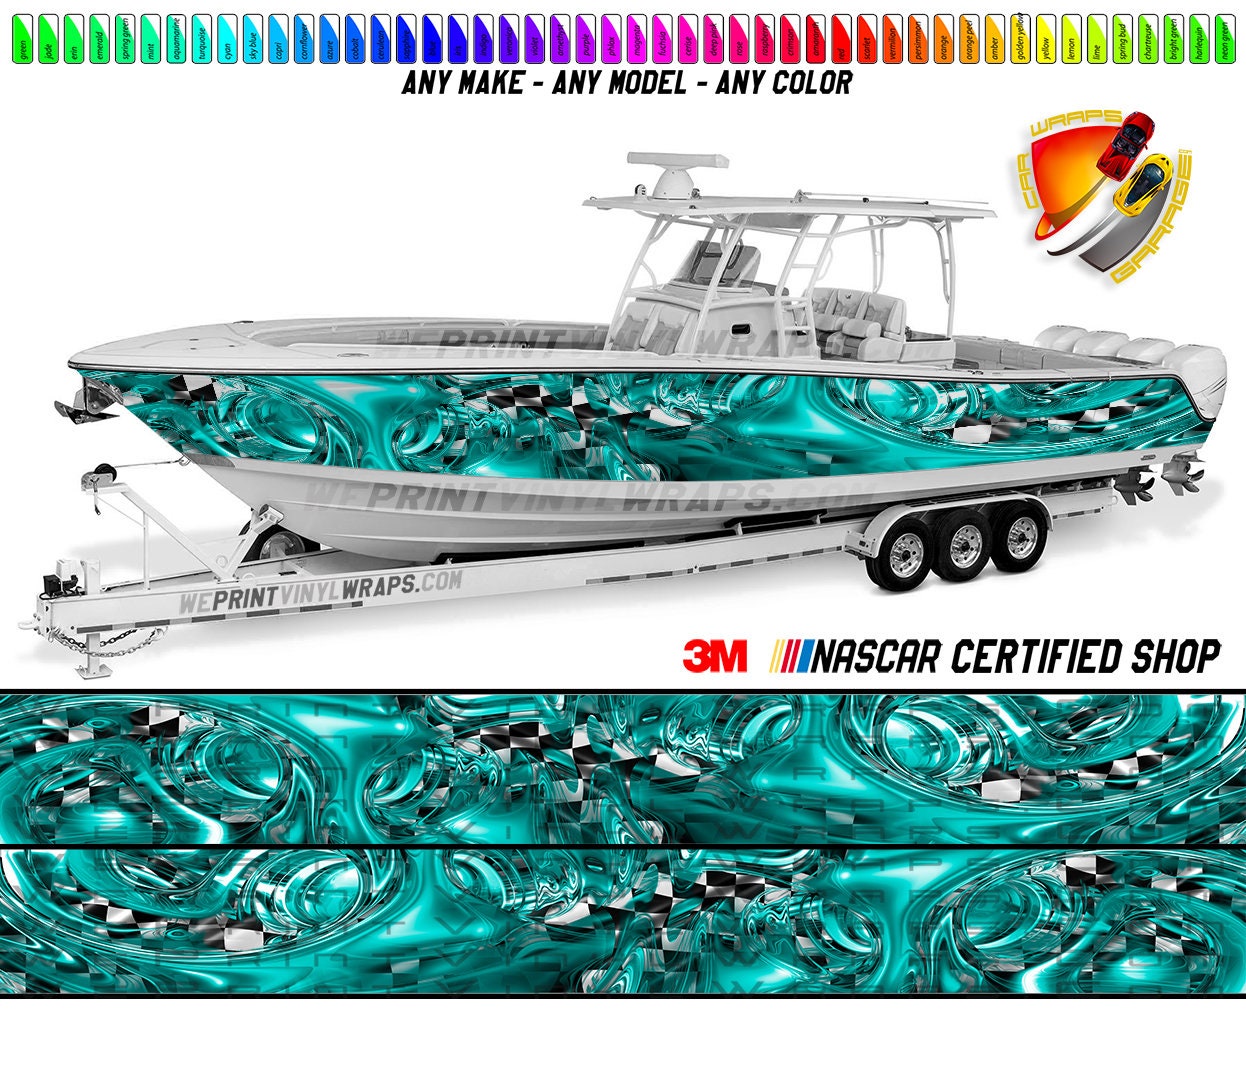 Teal and Checkered Graphic Vinyl Boat Wrap Decal Fishing Pontoon